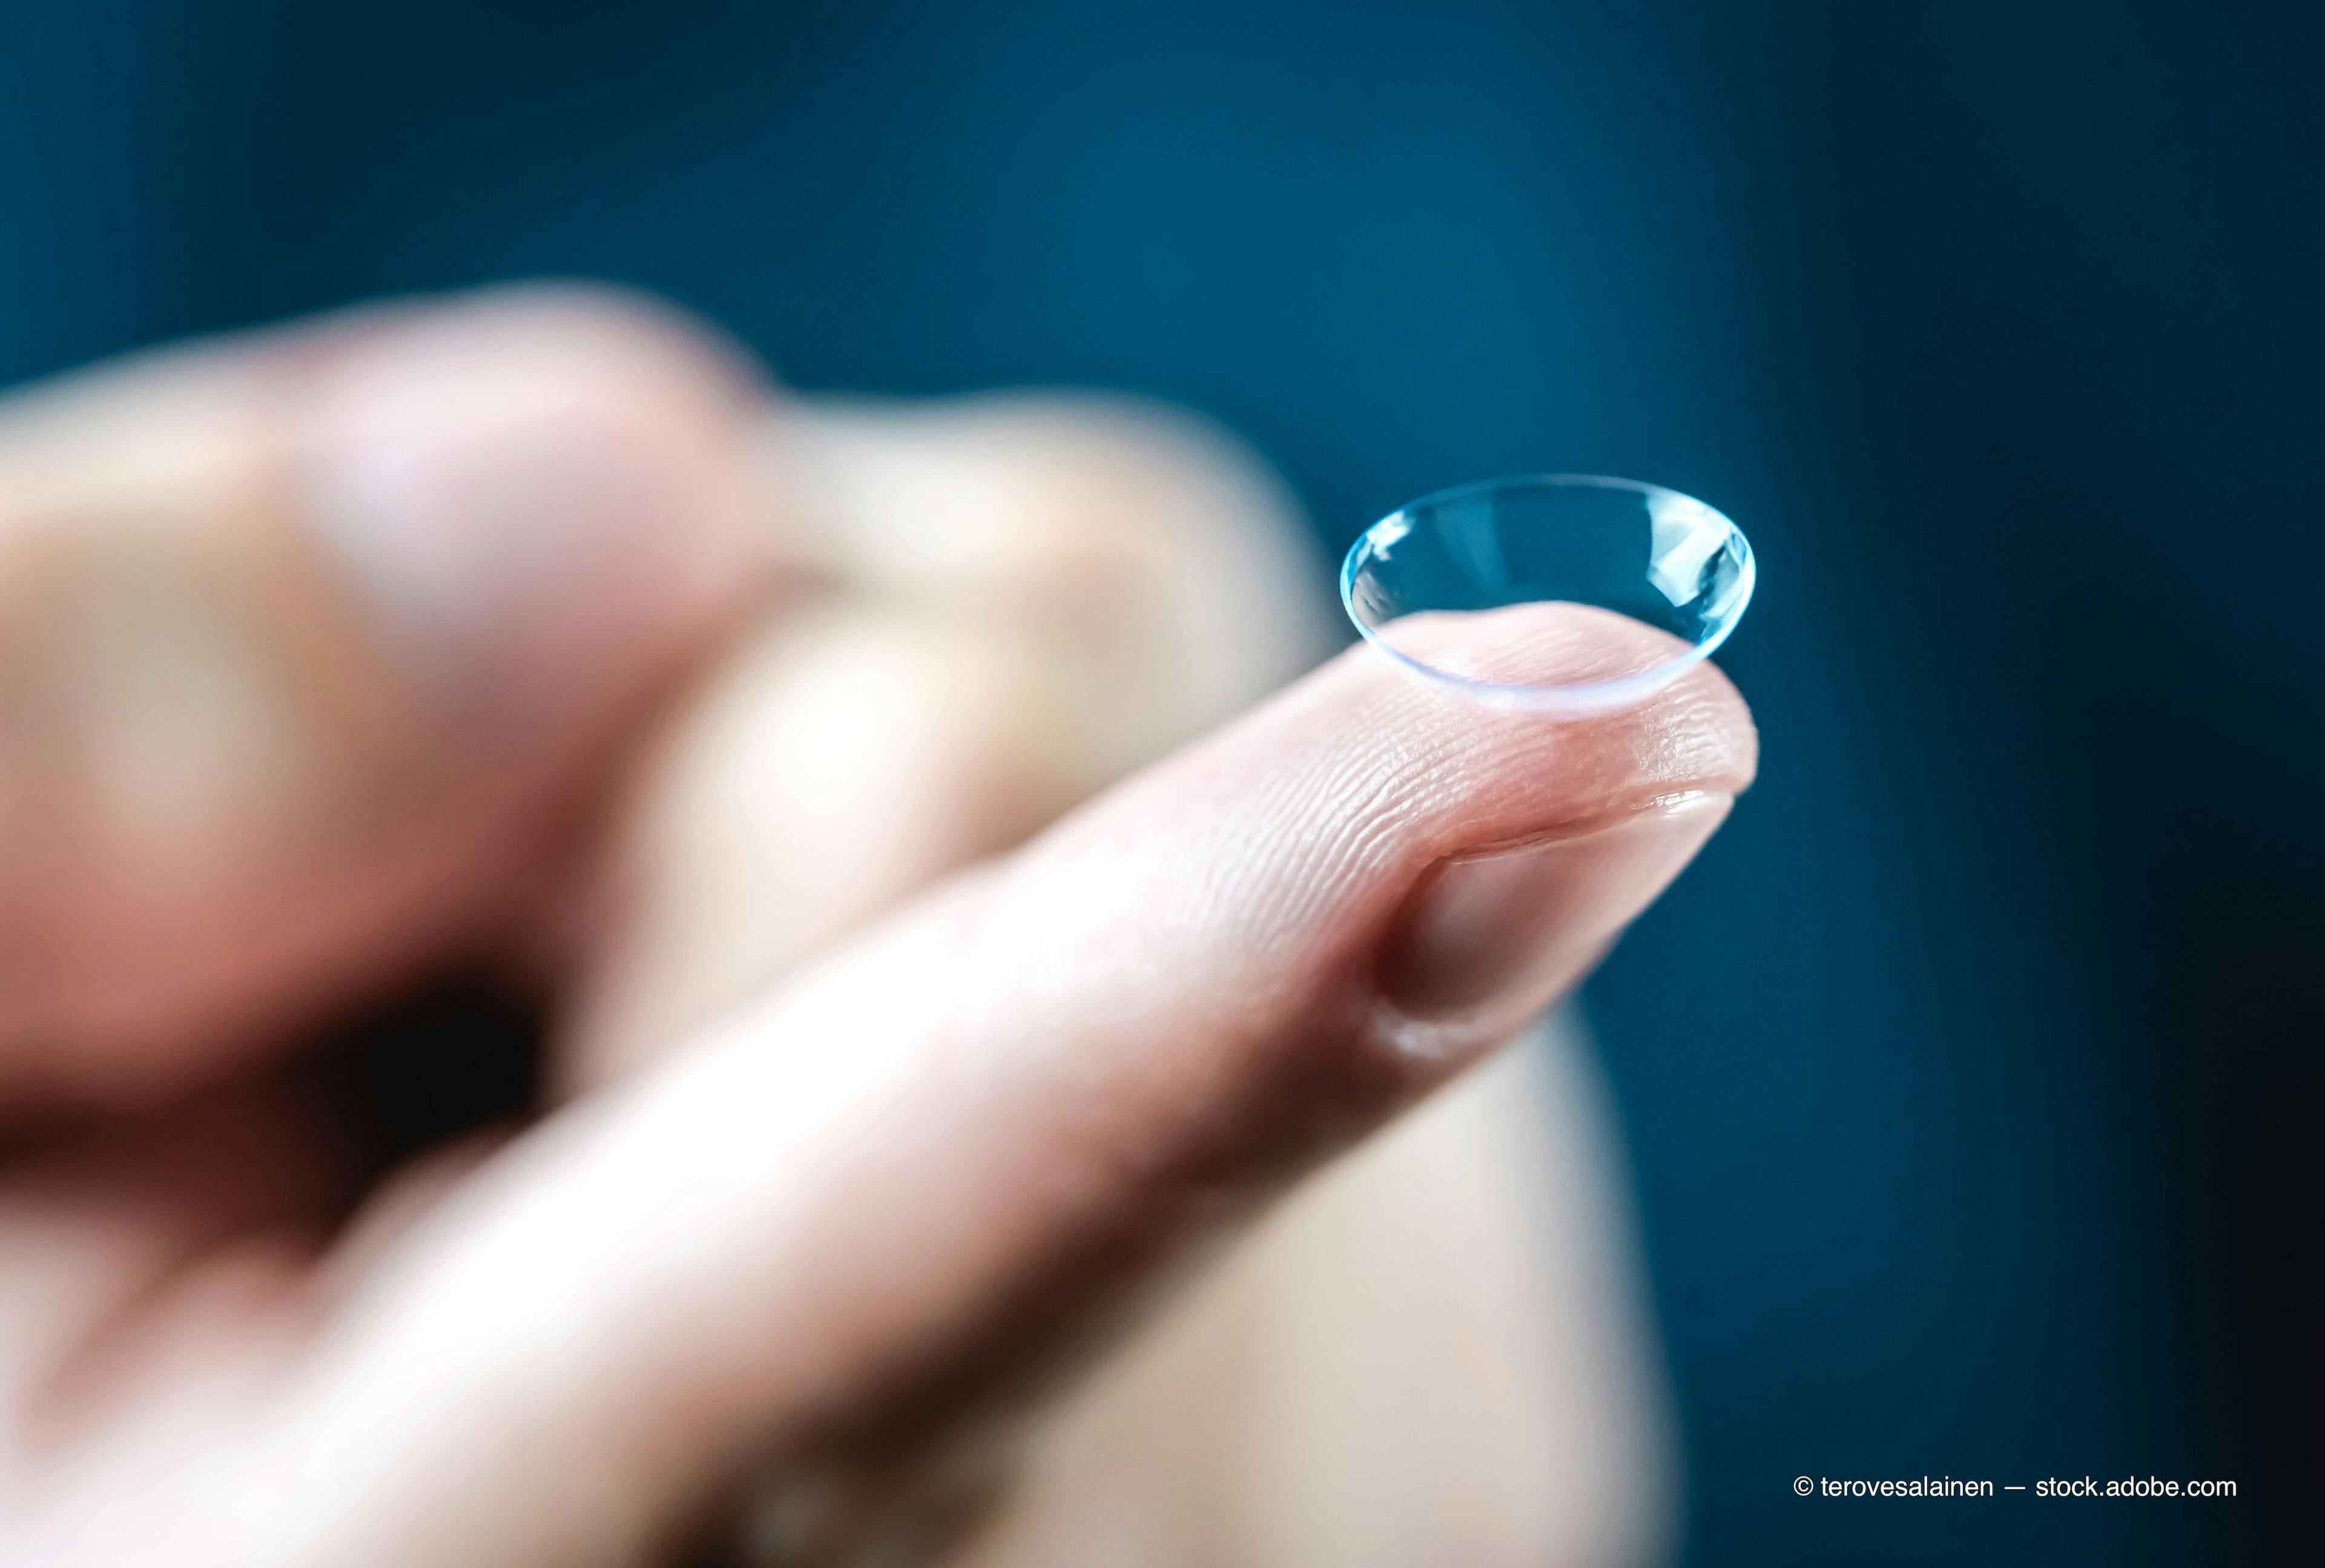 Bausch + Lomb launches customizable soft contact lenses in US